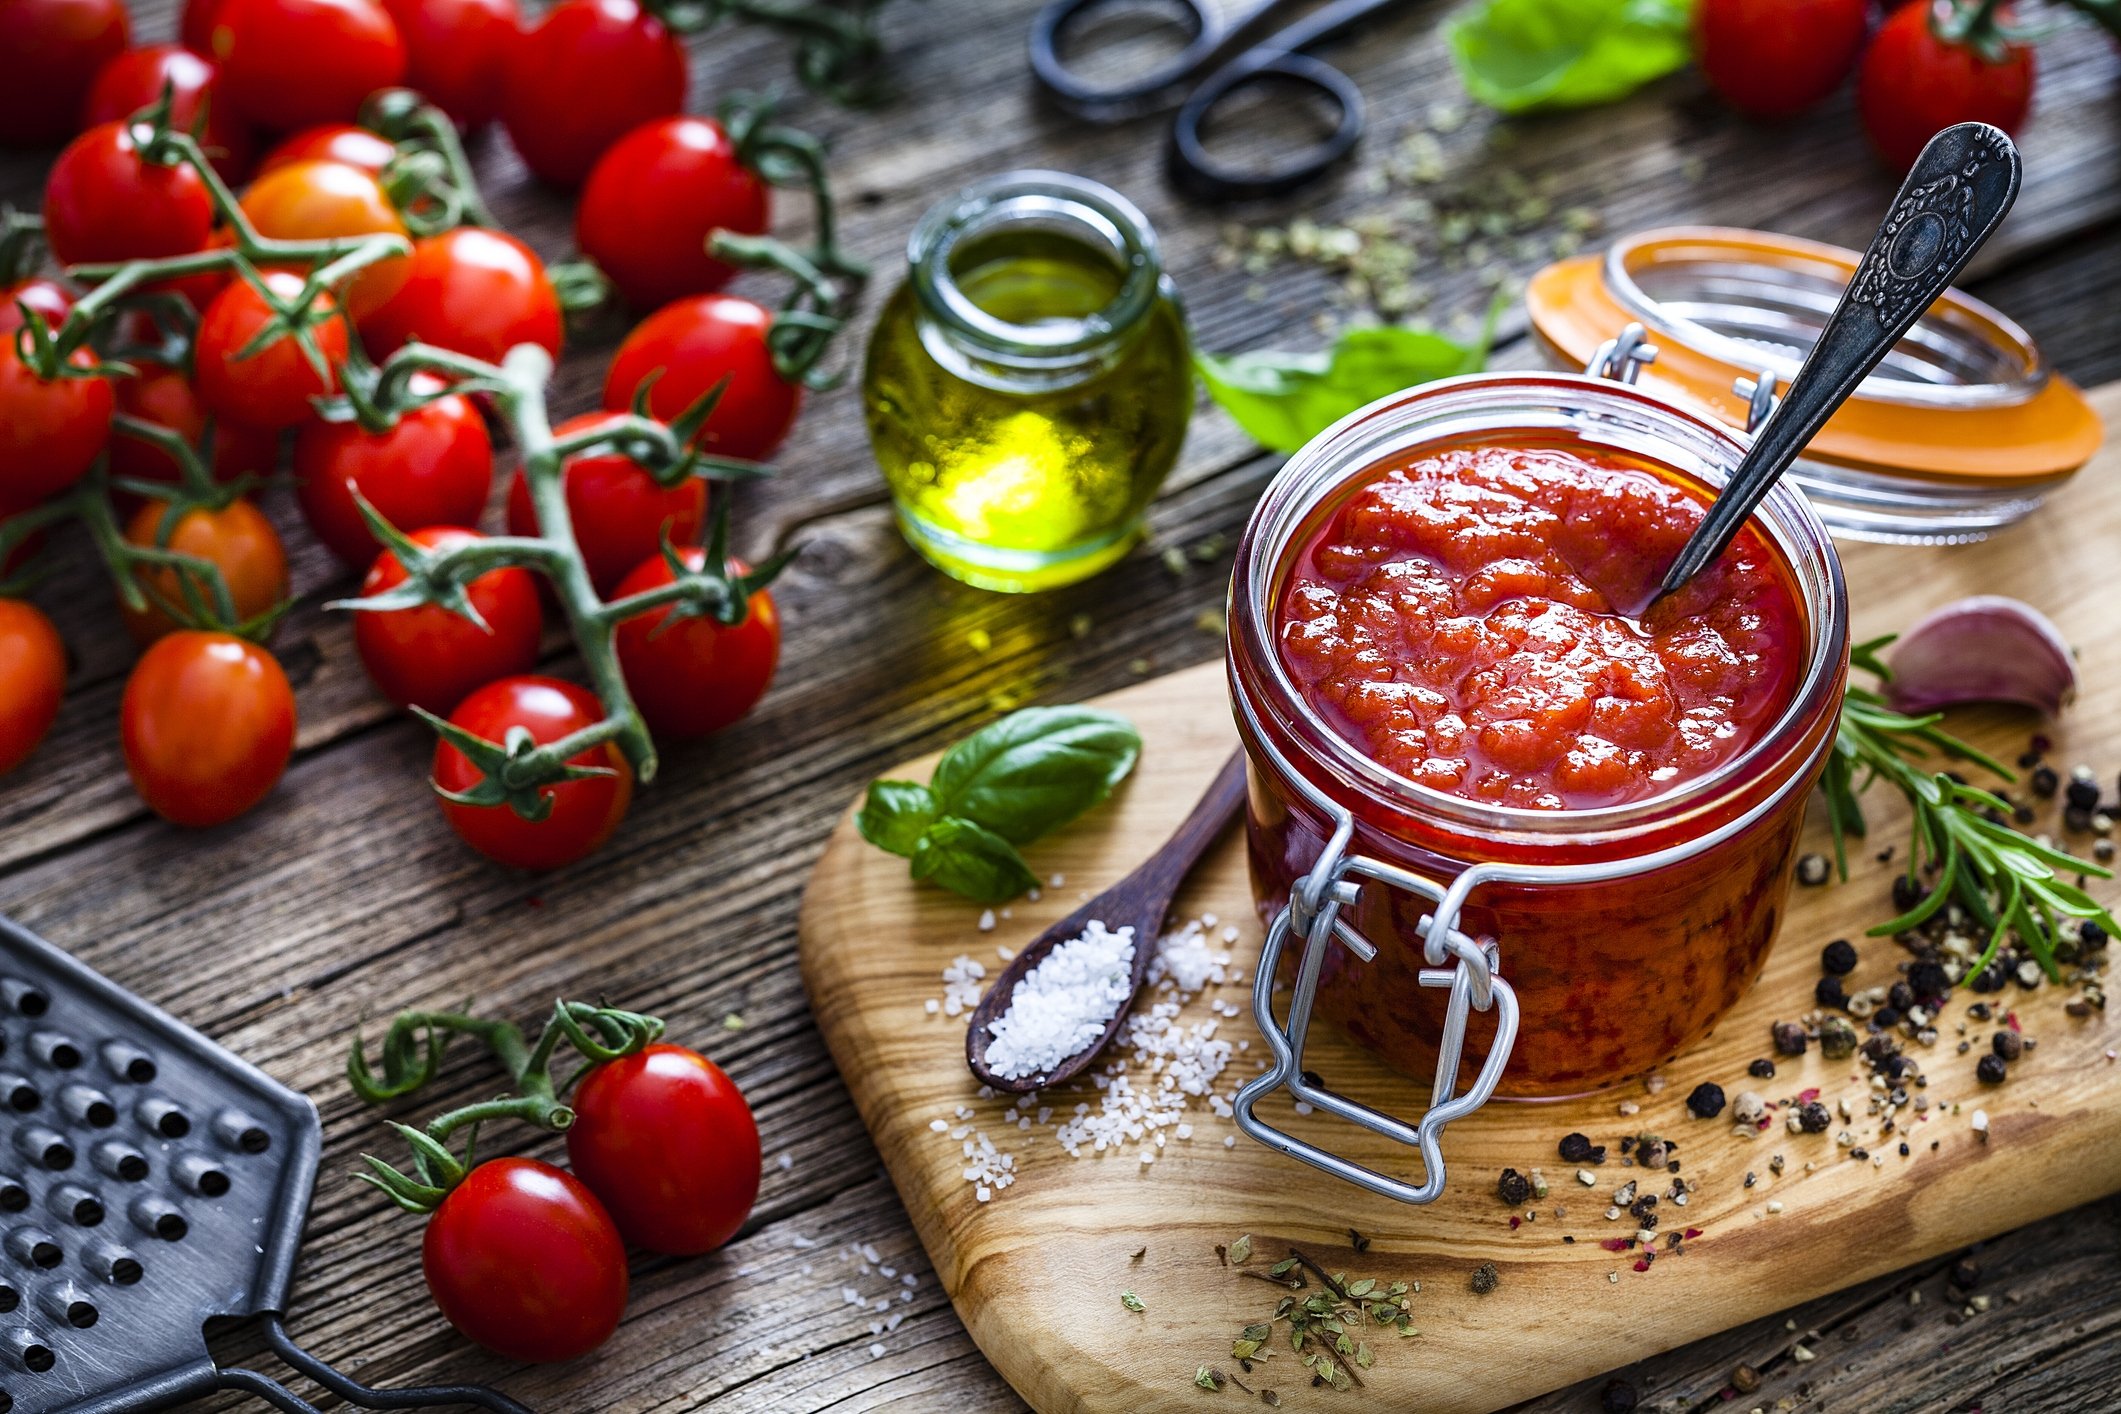 Some people like to add peppers, rosemary, basil and olive oil to their preserved tomatoes with extra flavor. (iStock Photo)